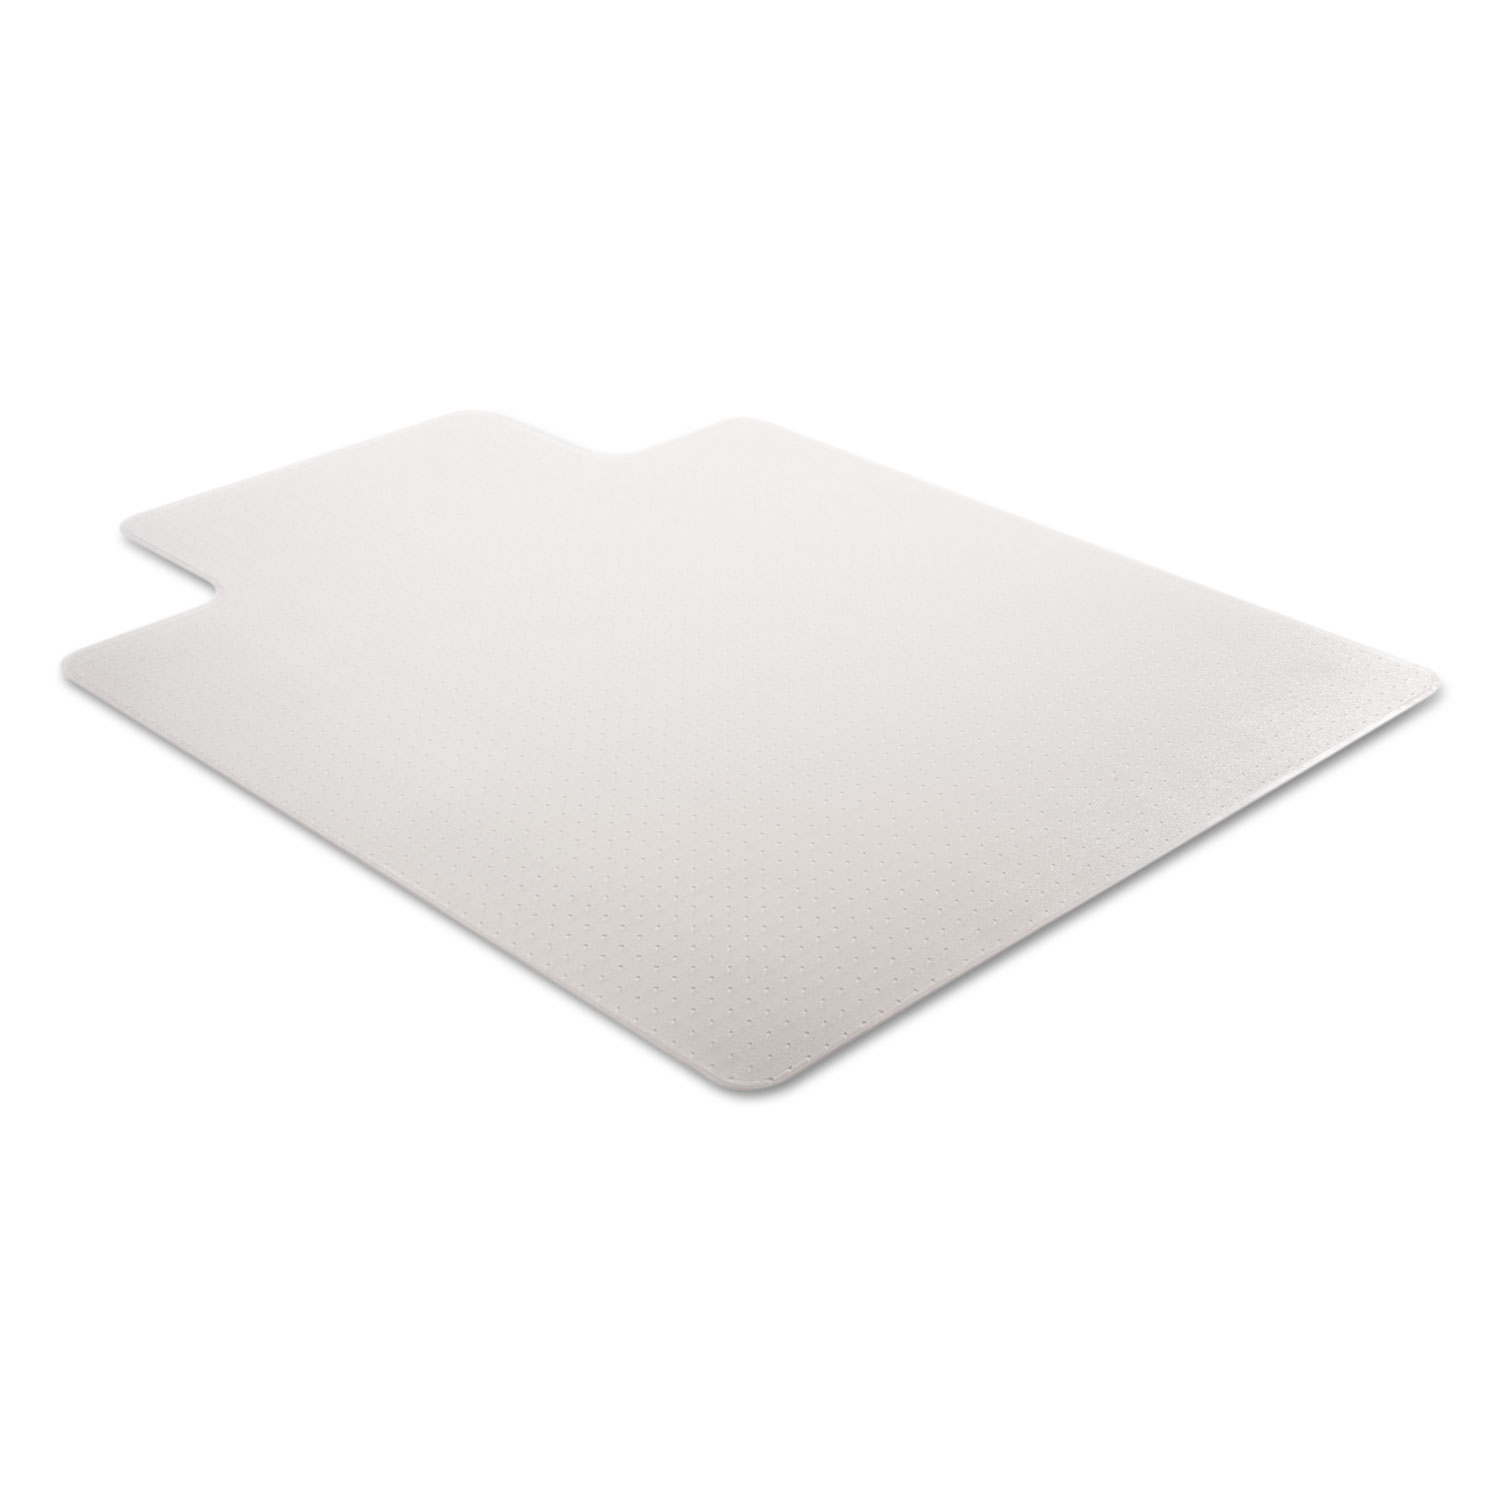 DuraMat Moderate Use Chair Mat for Low Pile Carpet, Beveled, 45x53 w/Lip, Clear